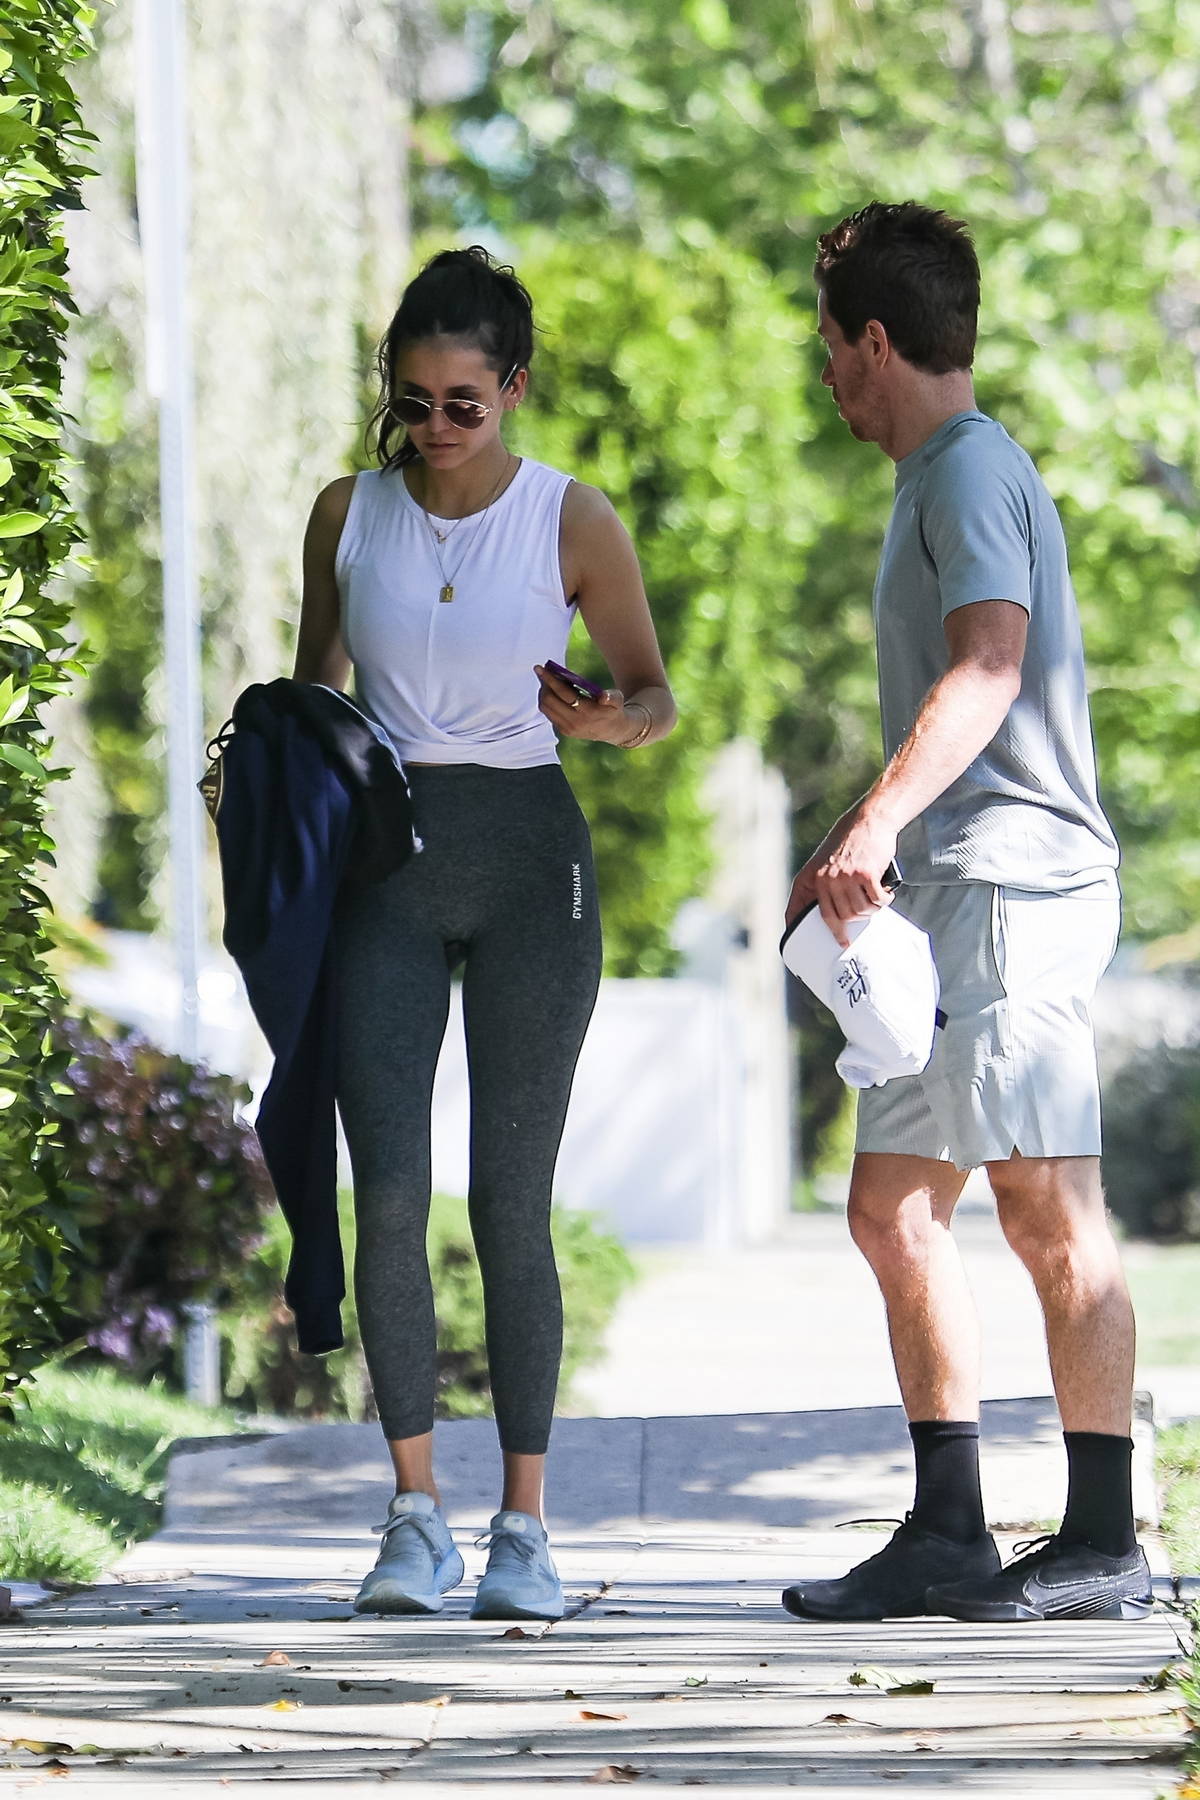 https://www.celebsfirst.com/wp-content/uploads/2021/04/nina-dobrev-looks-sporty-in-tank-top-and-leggings-while-heading-for-workout-with-shaun-white-in-los-angeles-190421_11.jpg